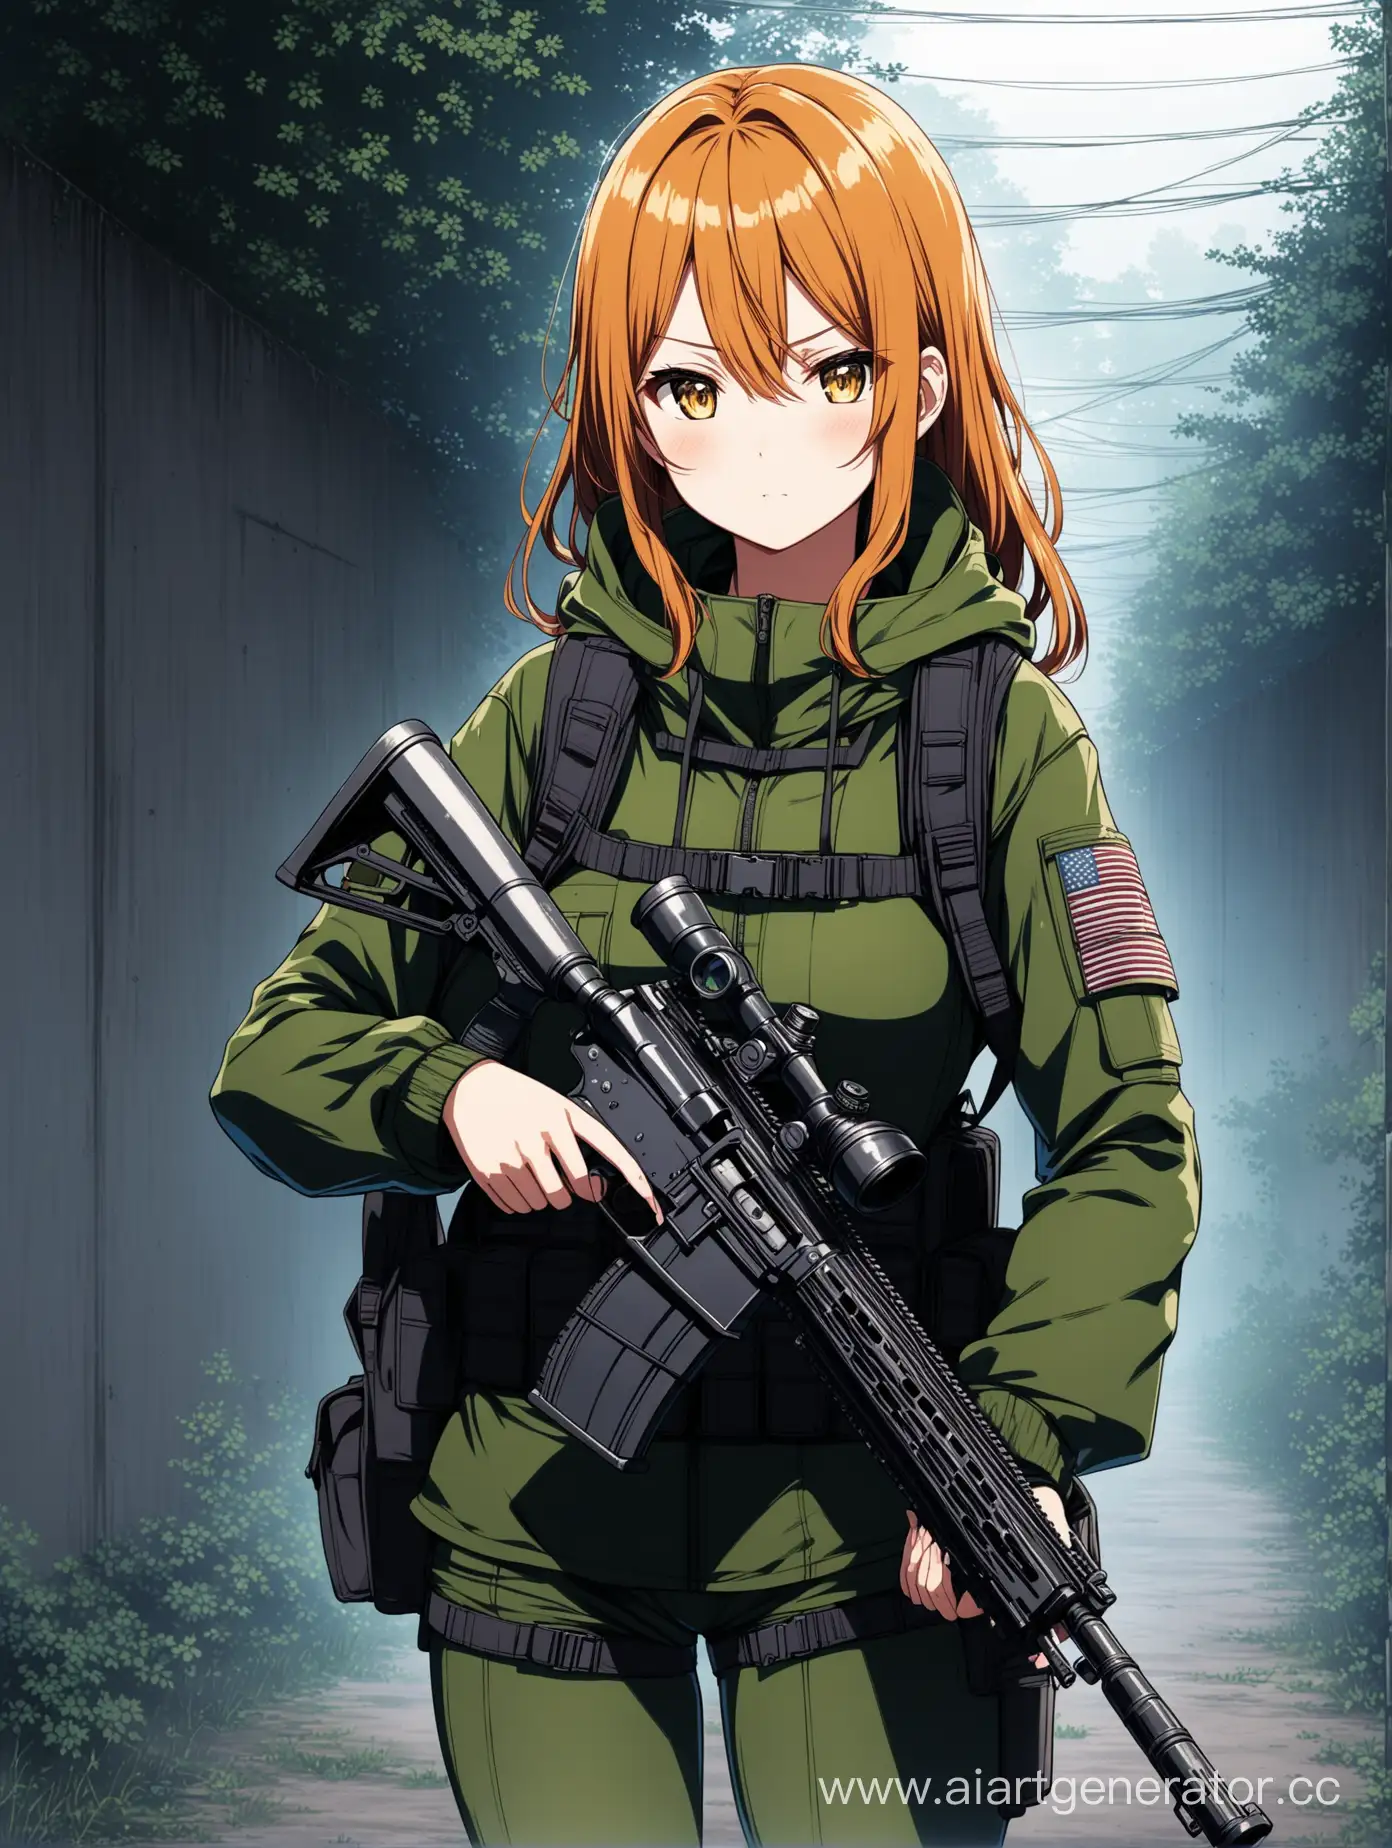 Anime-Girl-Armed-with-Rifle-in-Stalker-Universe